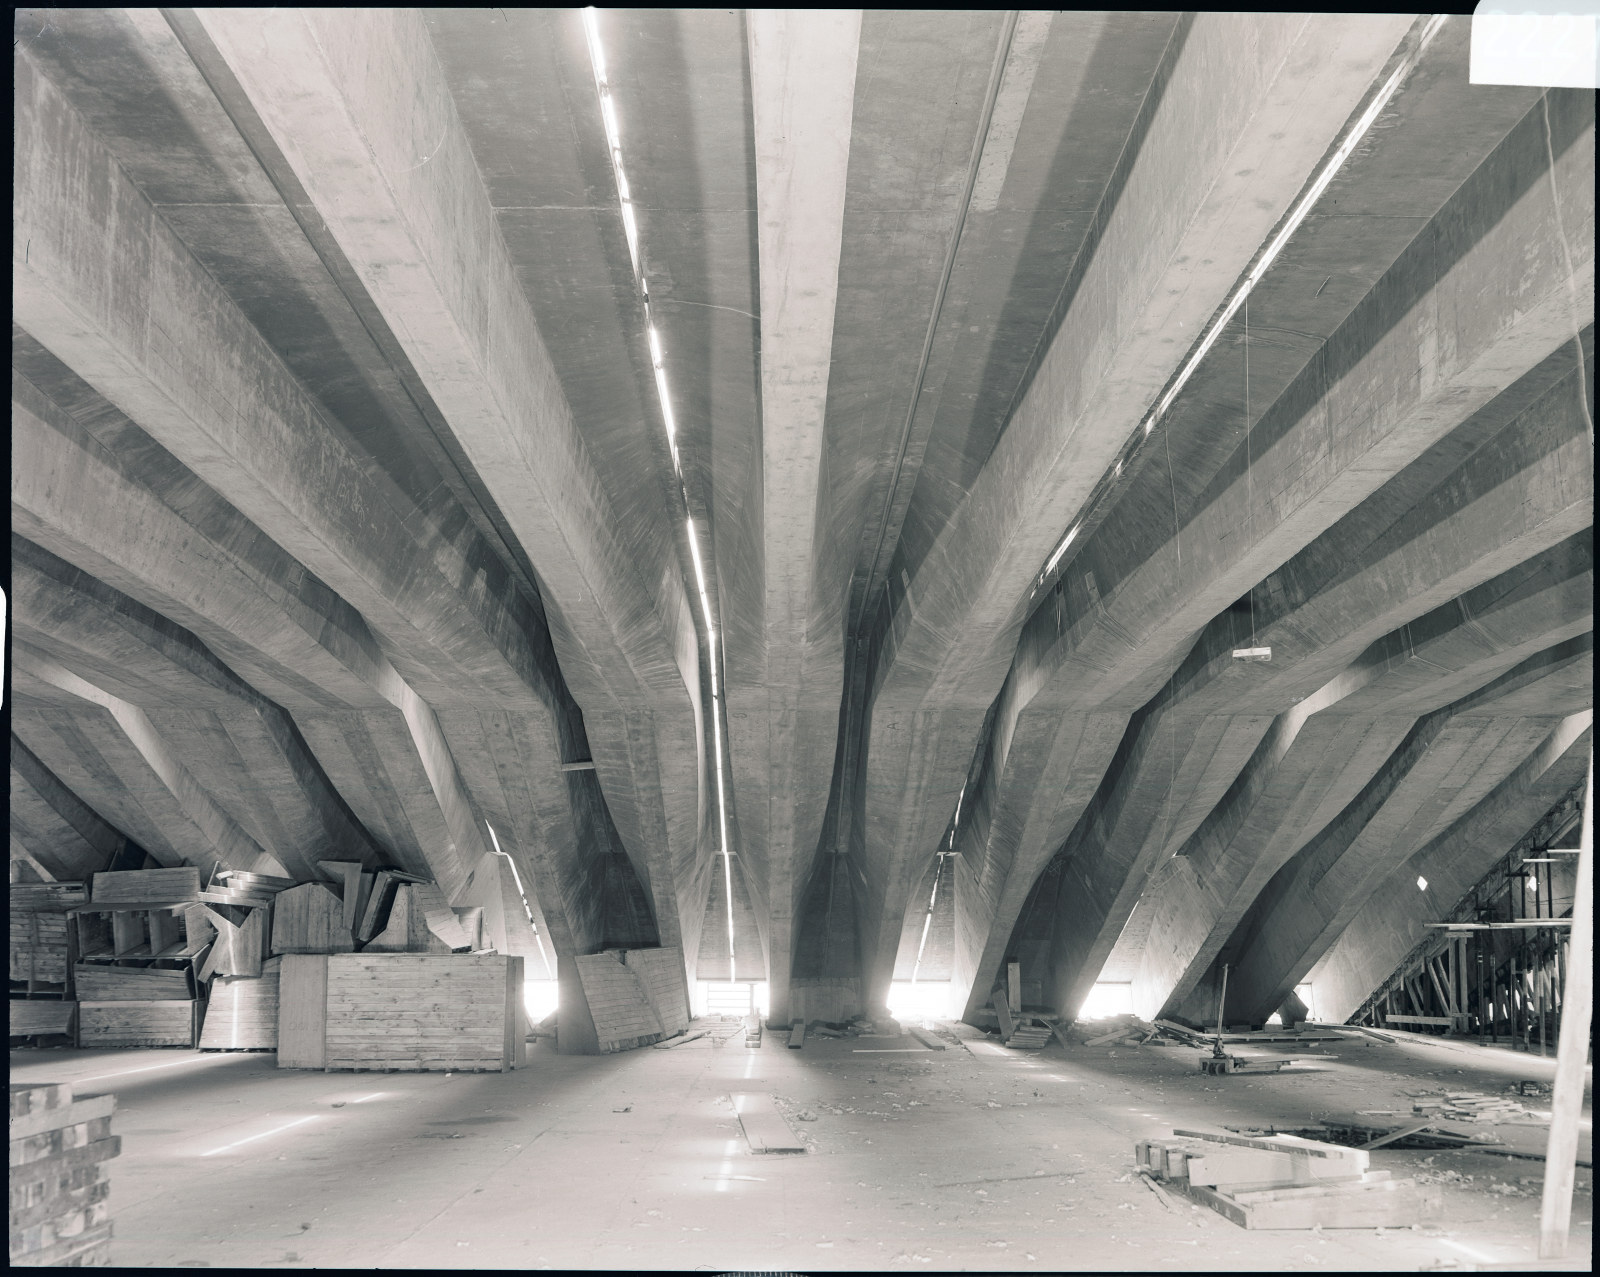 Government Printing Office 2 - 22274 - Sydney Opera House under construction [Public Works; interiors; building construction; ceilings] [GPO Original locations or series - St60170] [3-4/10/1962]